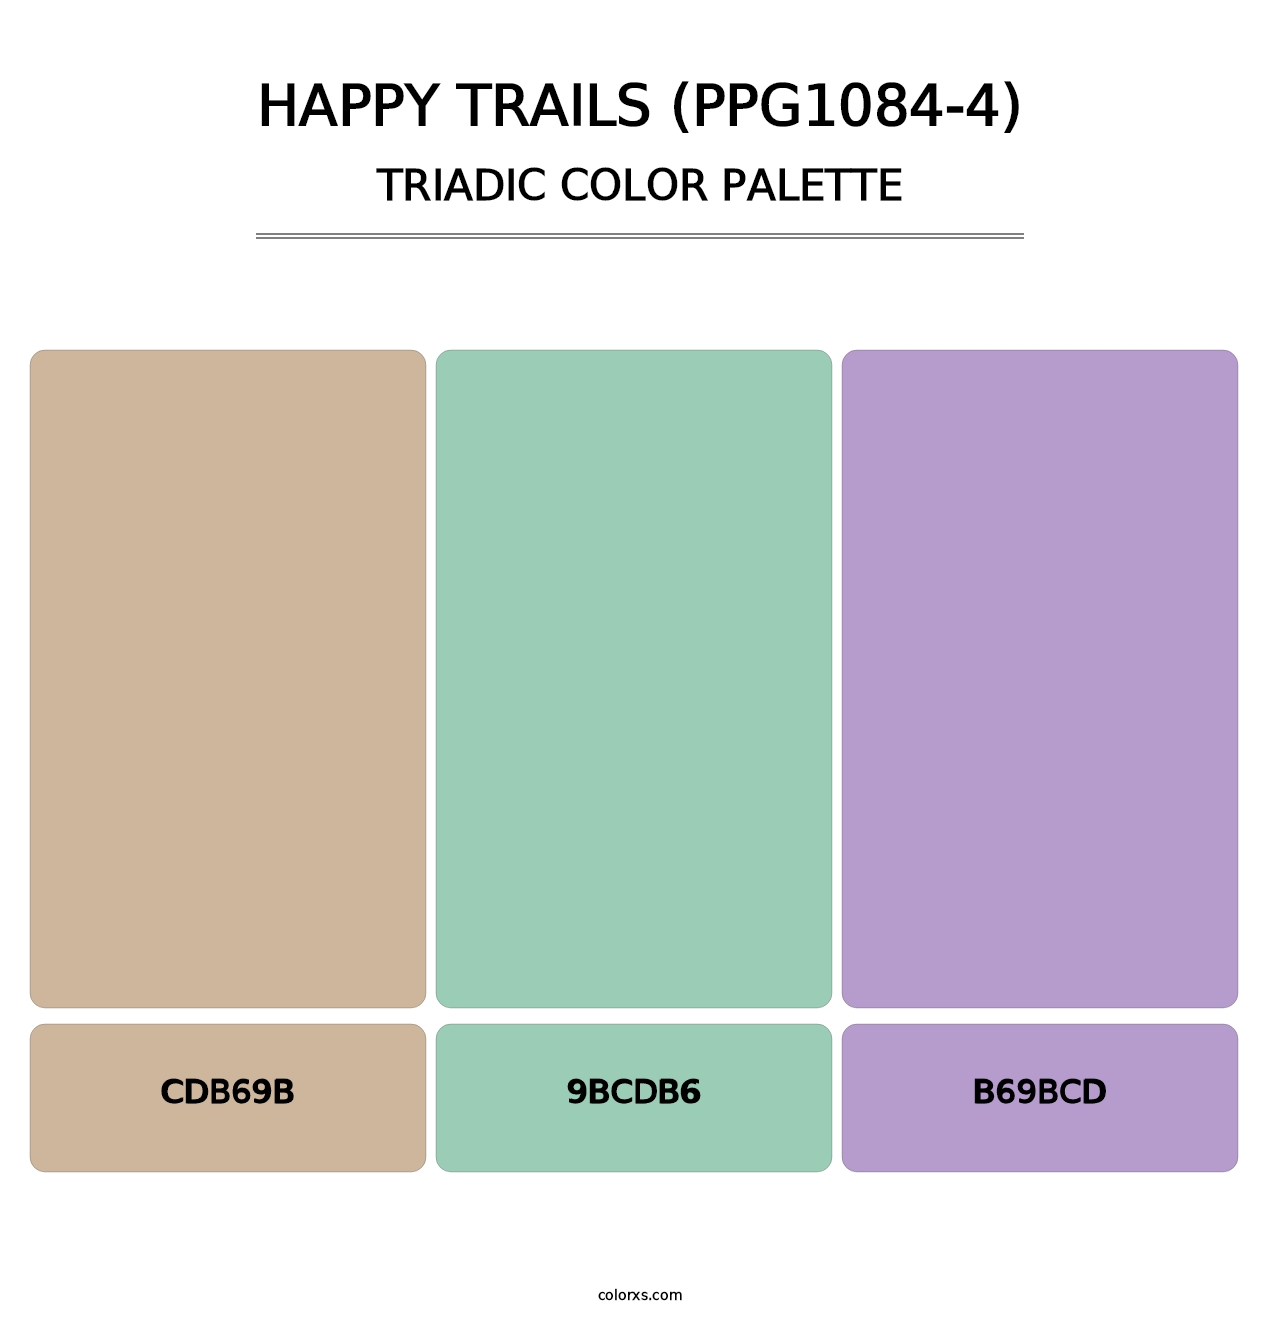 Happy Trails (PPG1084-4) - Triadic Color Palette